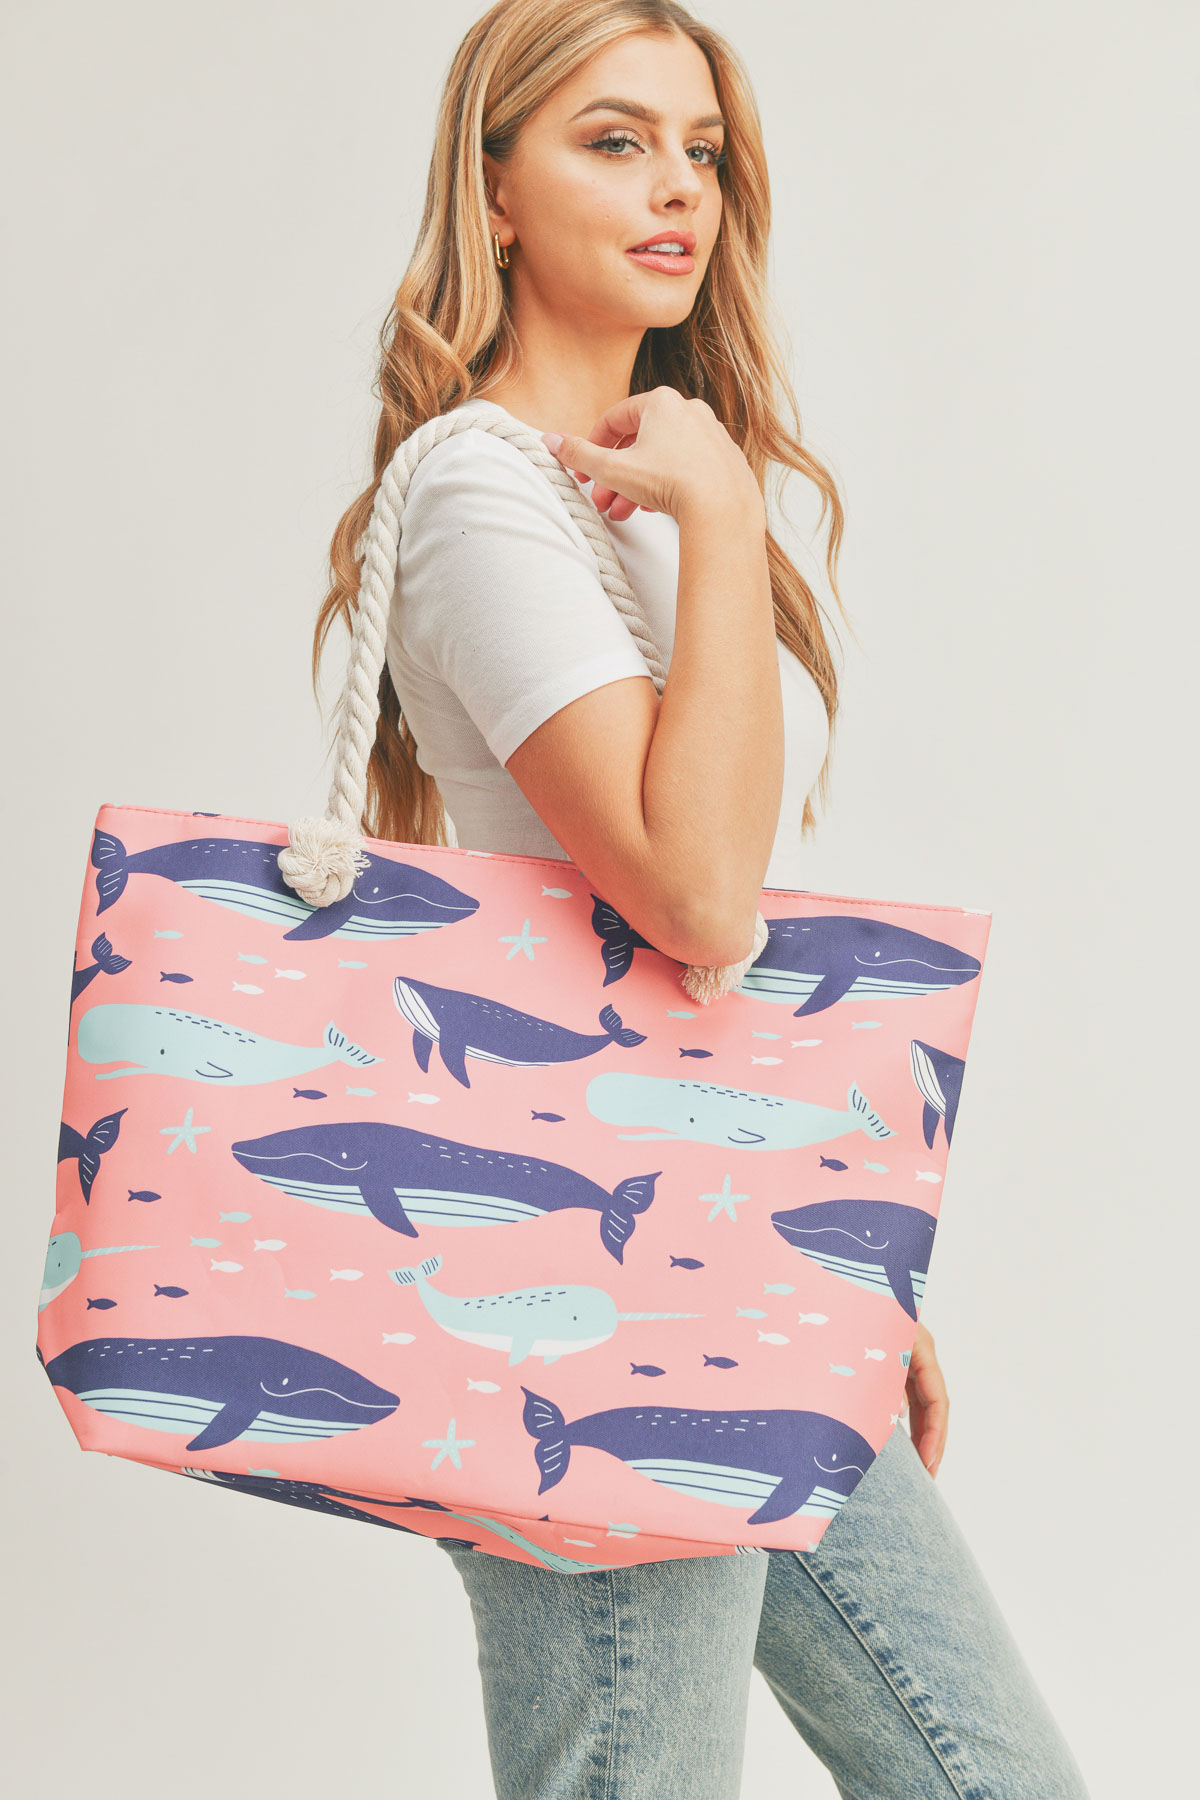 WHALE PRINT TOTE BAG WITH ROPE HANDLES.